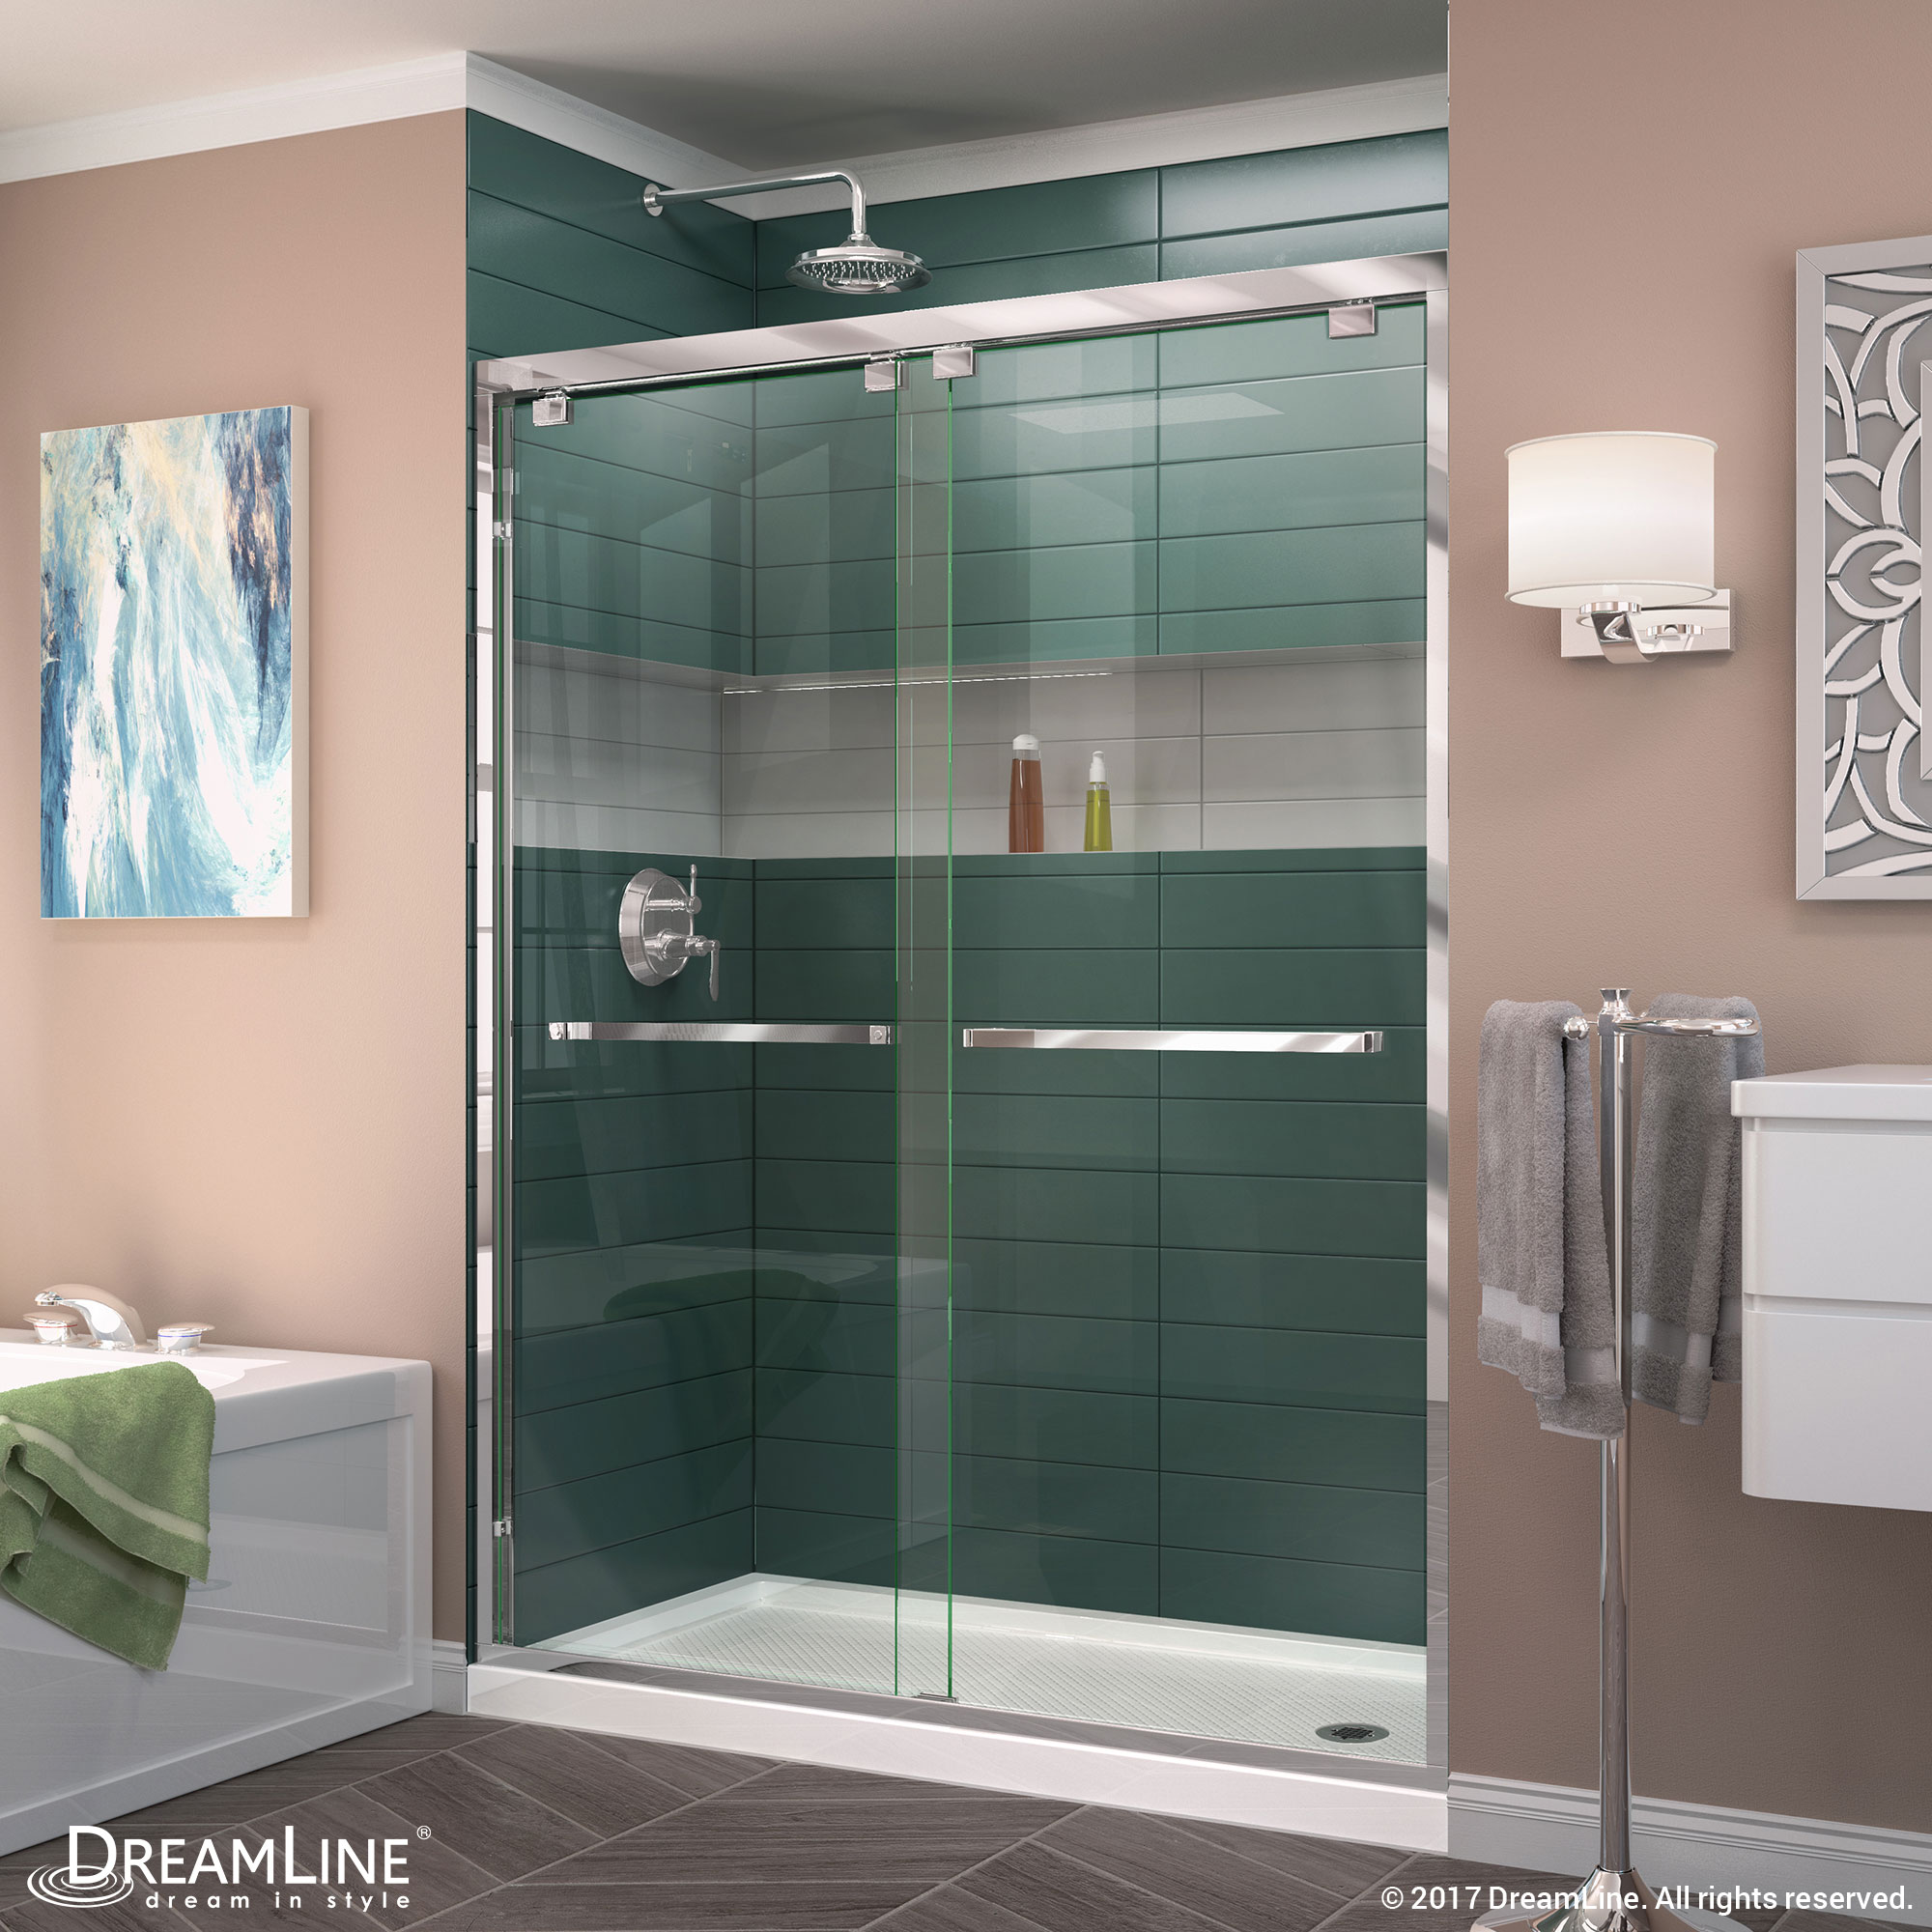 DreamLine Encore 34 in. D x 60 in. W x 78 3/4 in. H Bypass Shower Door in Brushed Nickel and Left Drain White Base Kit